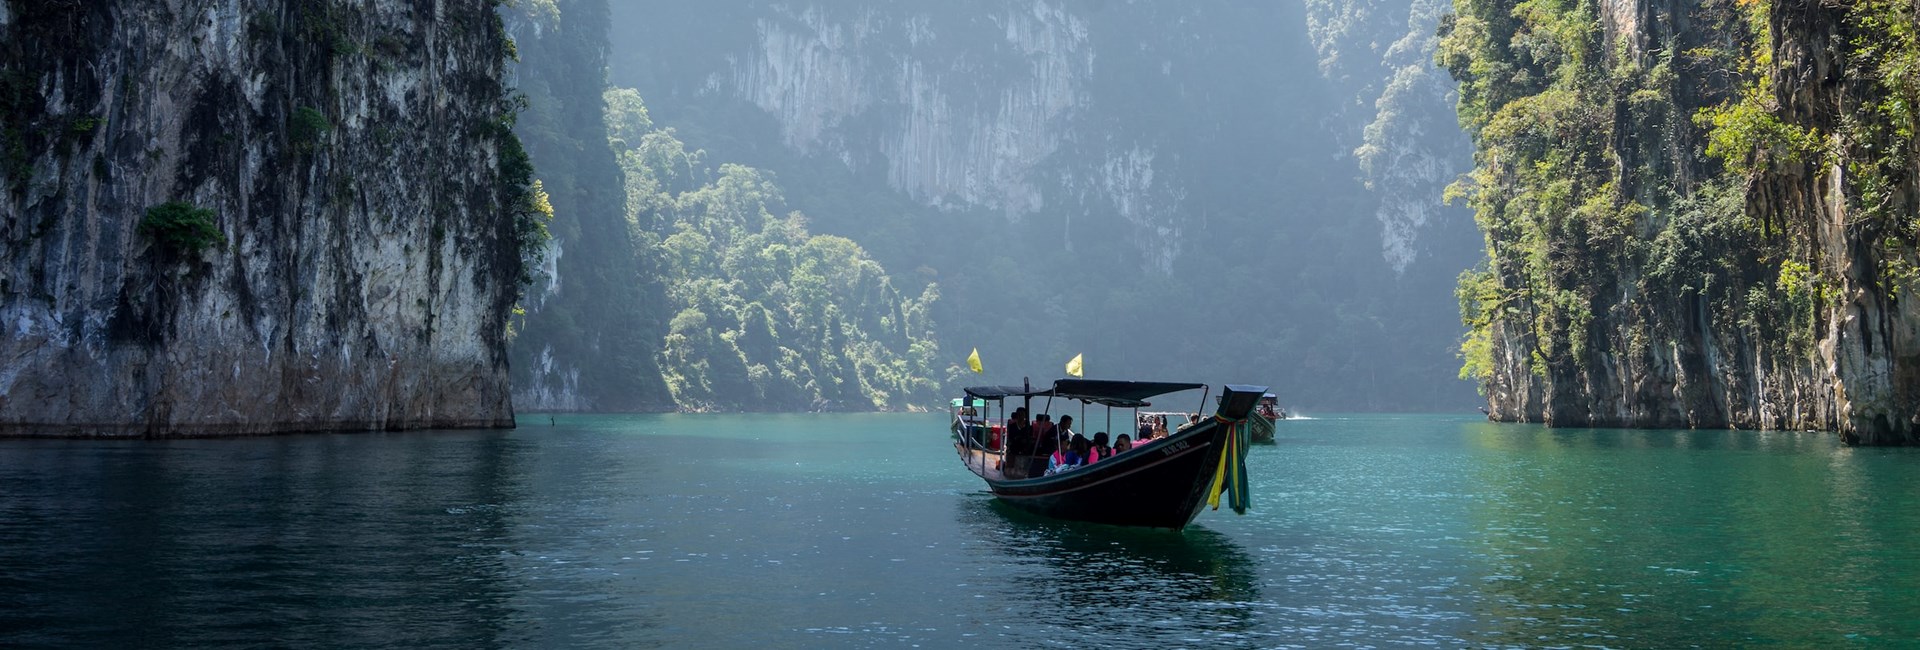 A wooden boat floating on water in between cliffs